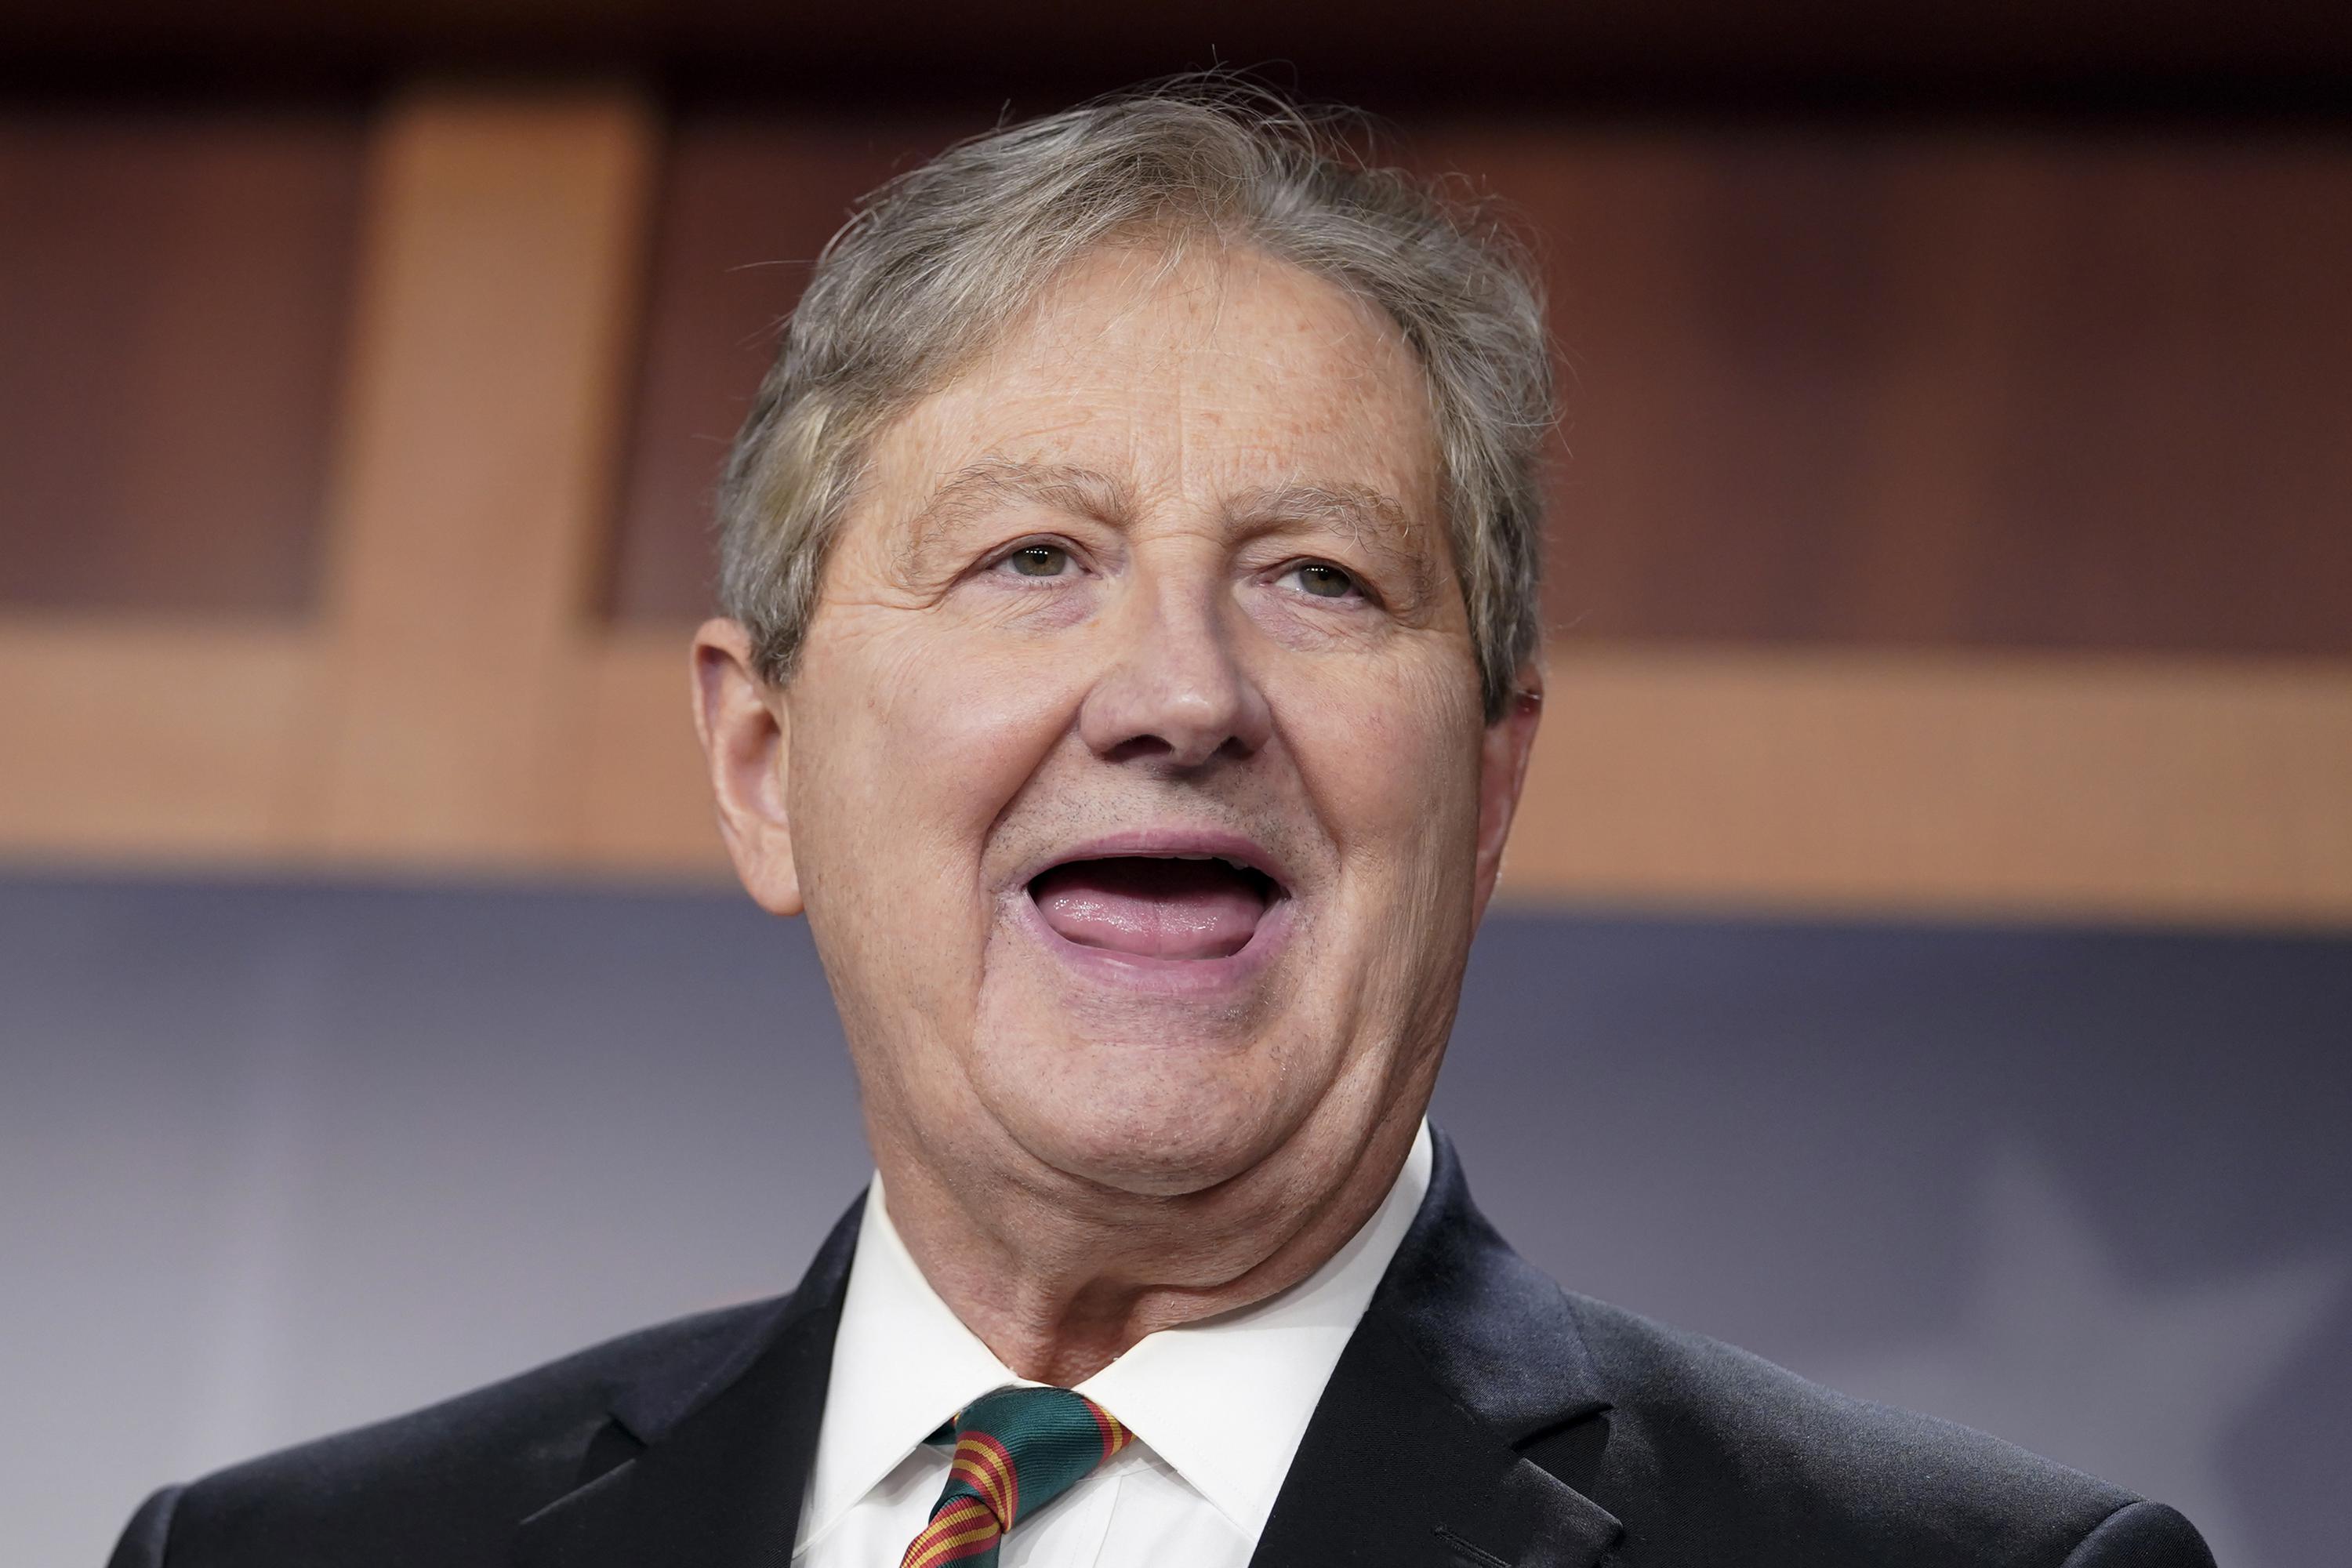 Sen. John Kennedy tells supporters he won't run for governor AP News